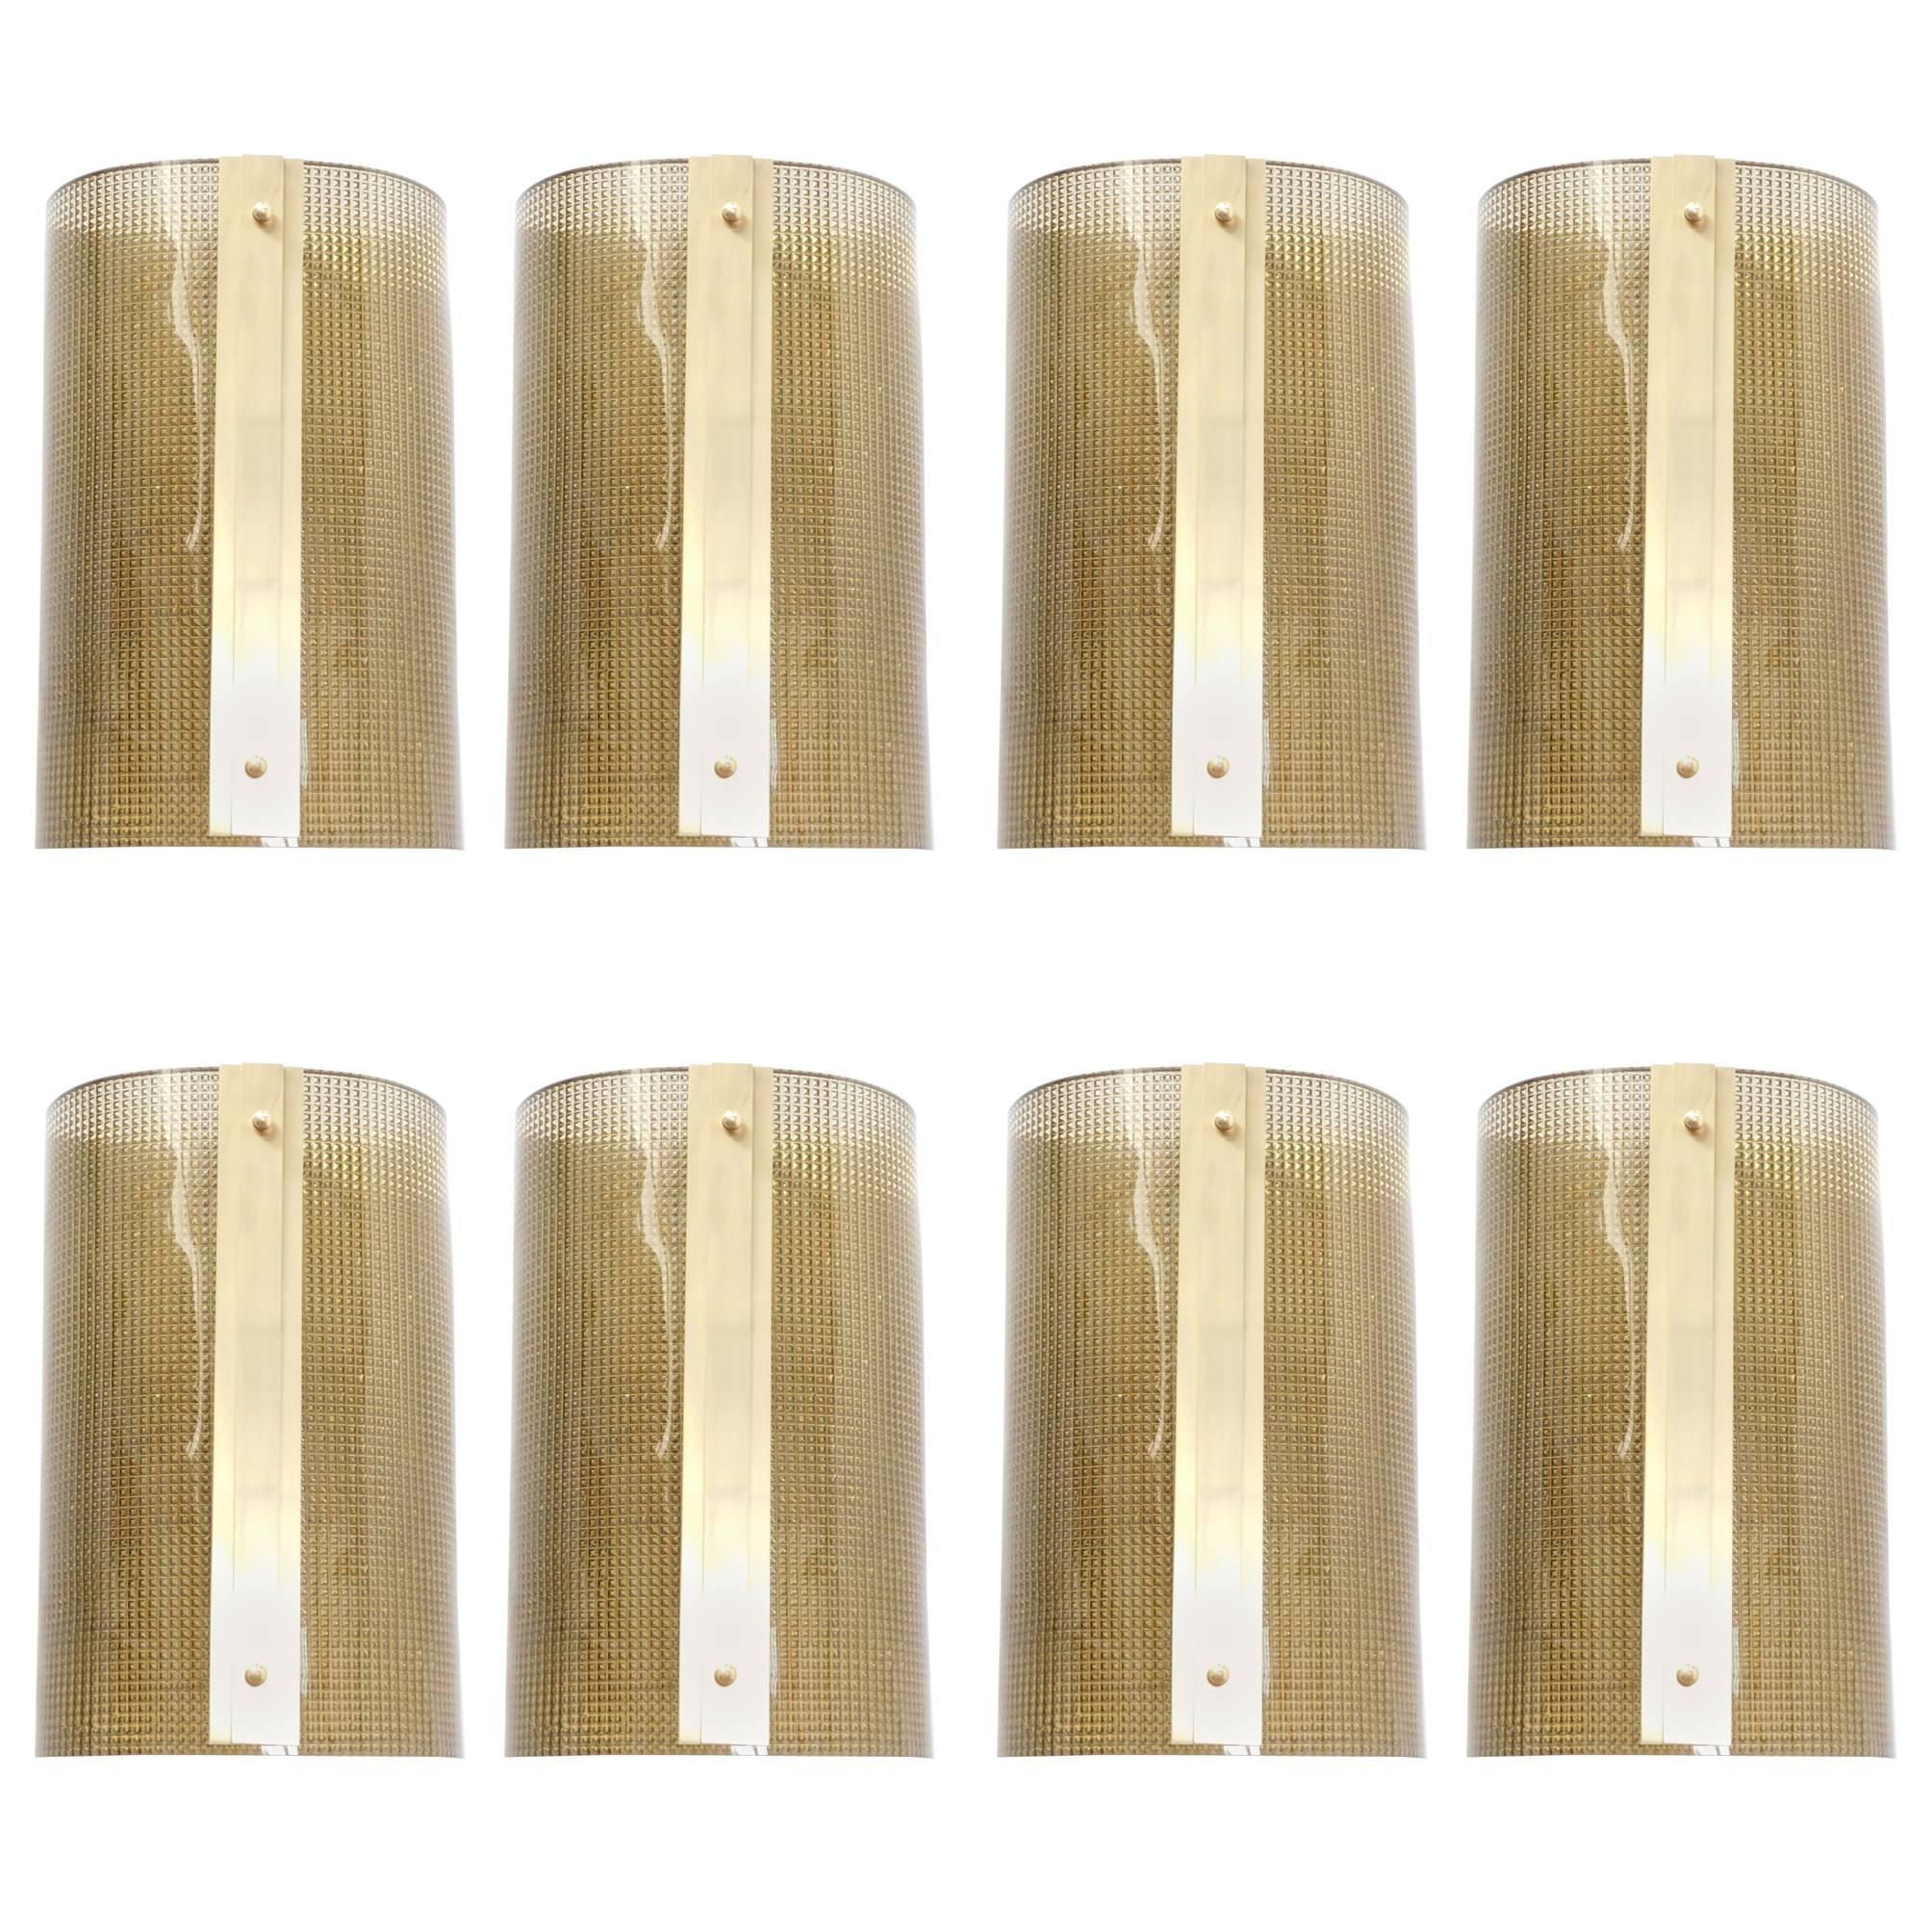 Polished Strutturato Sconce by Fabio Ltd - 8 available